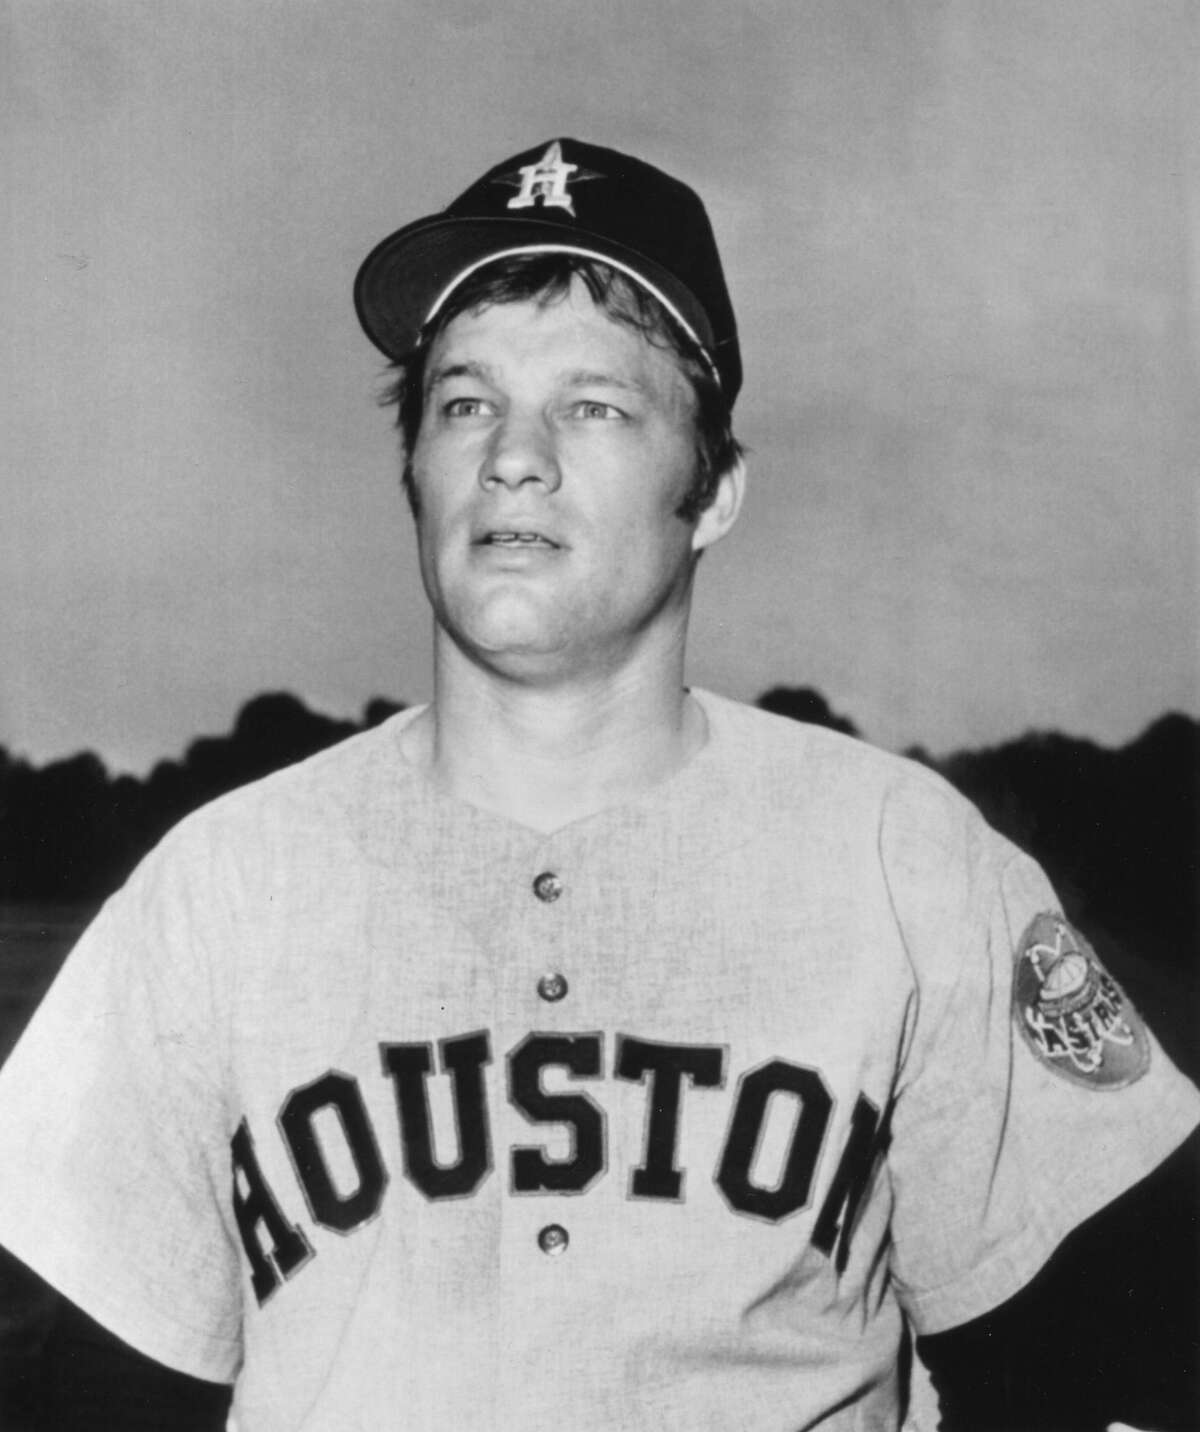 Baseball player Jim Bouton, of the Houston Astros, poses during a break in spring training, Cocao Beach, Florida, 1970. (Photo by Transcendental Graphics/Getty Images)